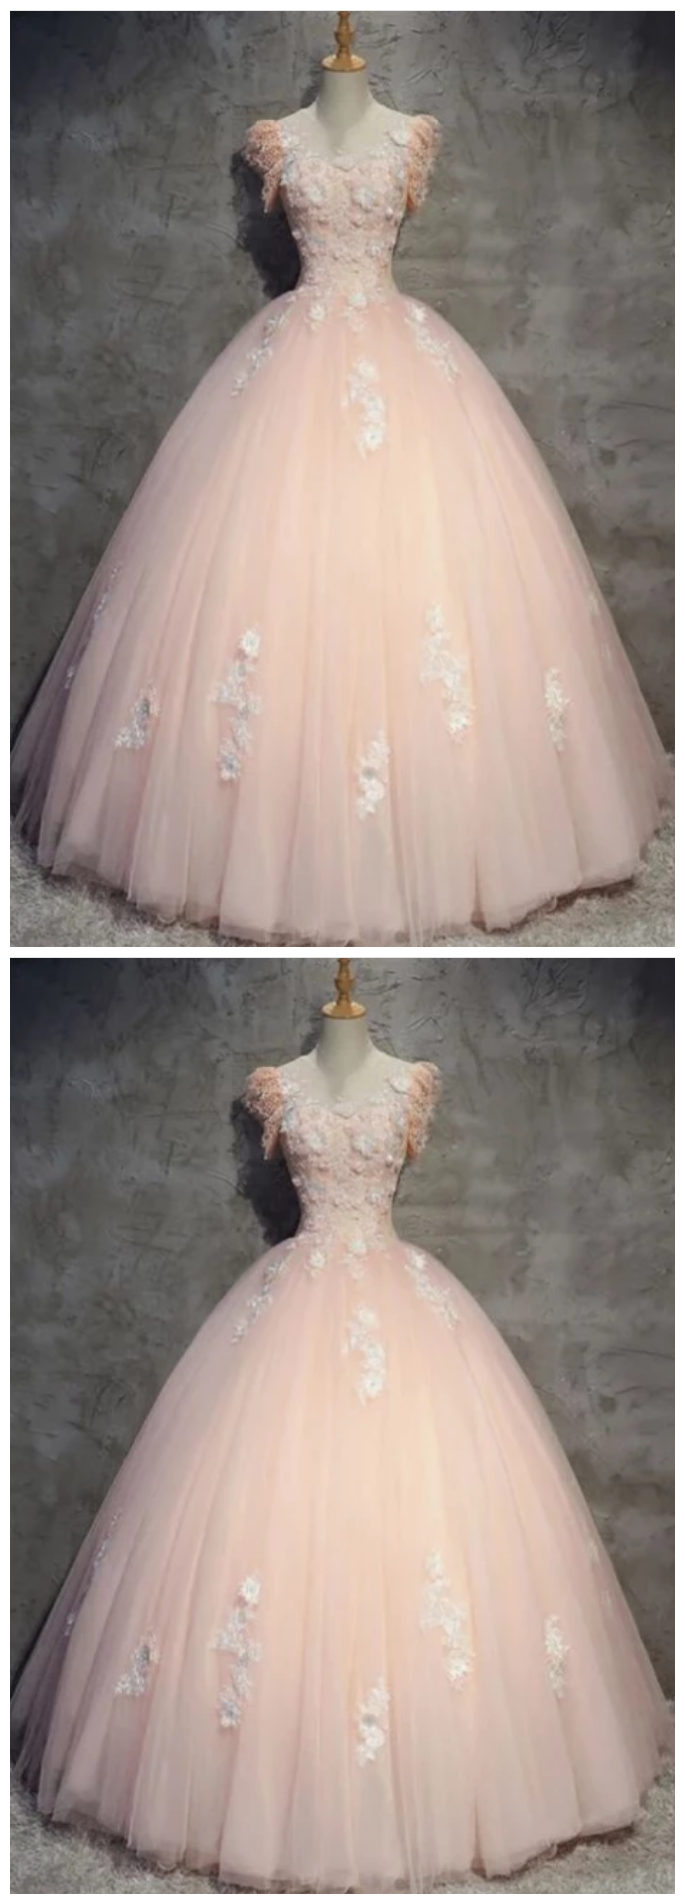 Pink Tulle Lace Long Prom Gown, Pink Evening Dress